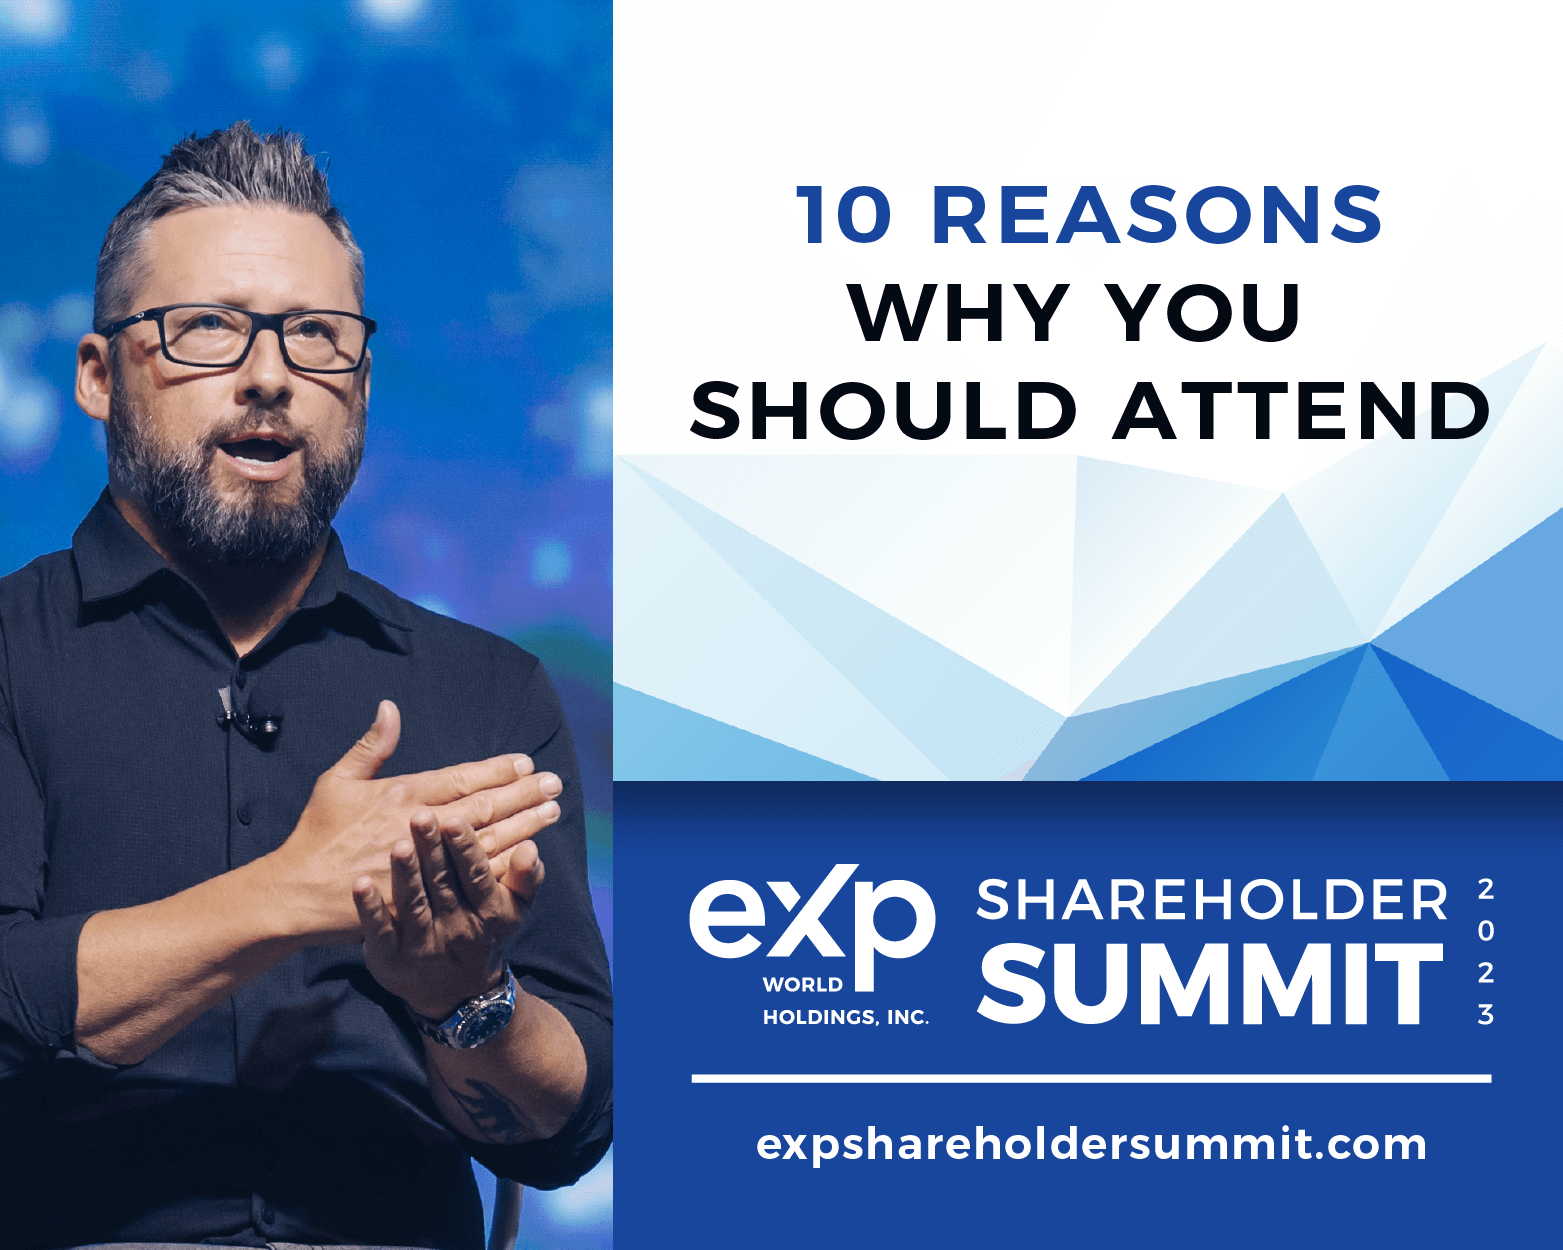 10 reasons to attend shareholder summit